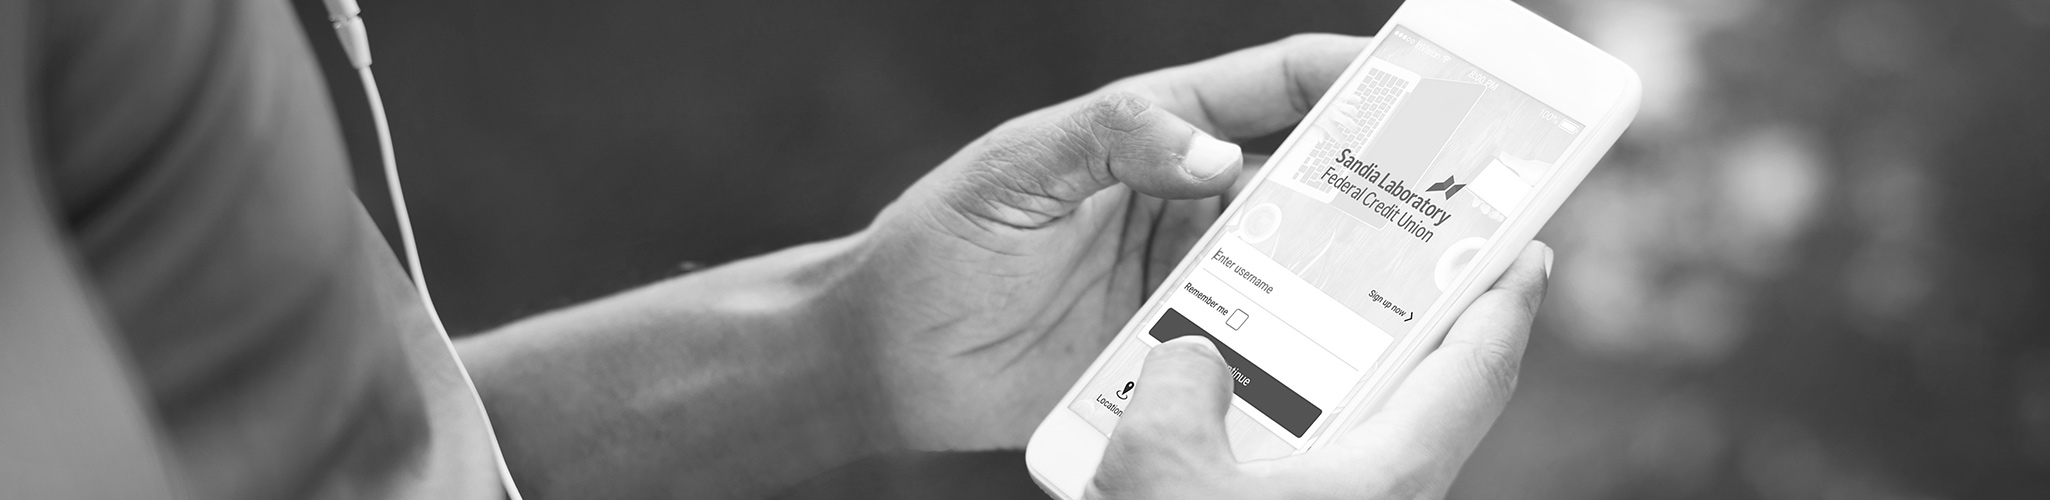 Male hands holding a phone showing a screenshot of SLFCU's new online banking system.